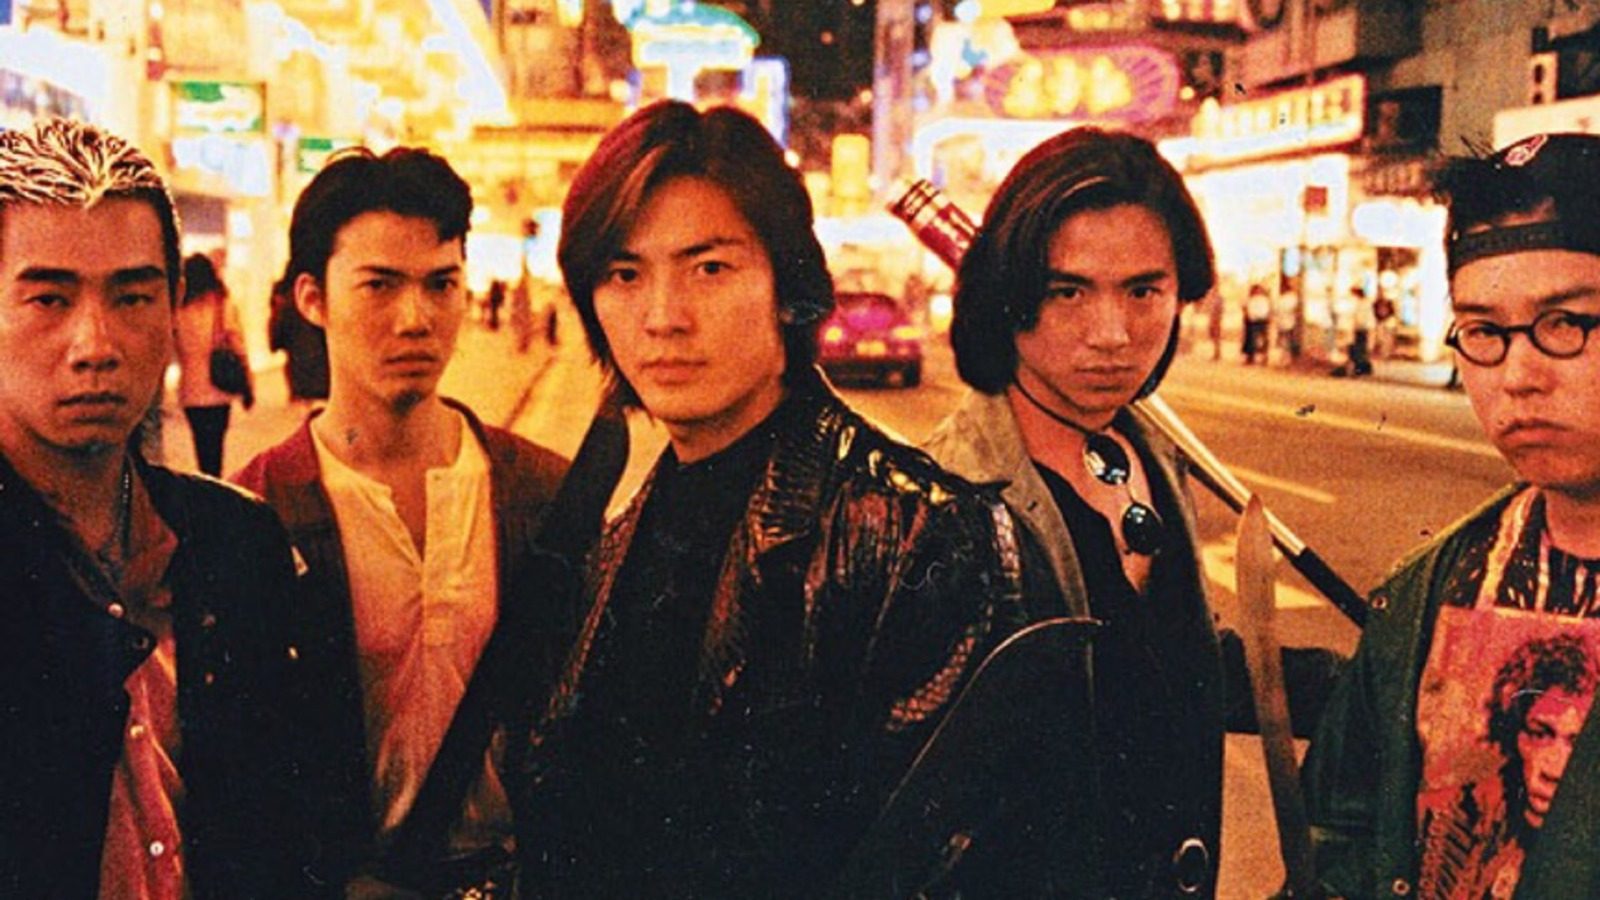 Andrew Lau’s triad film Young and Dangerous, starring Ekin Cheng (centre), tells the story of a group of young gangsters. Photo: Golden Harvest